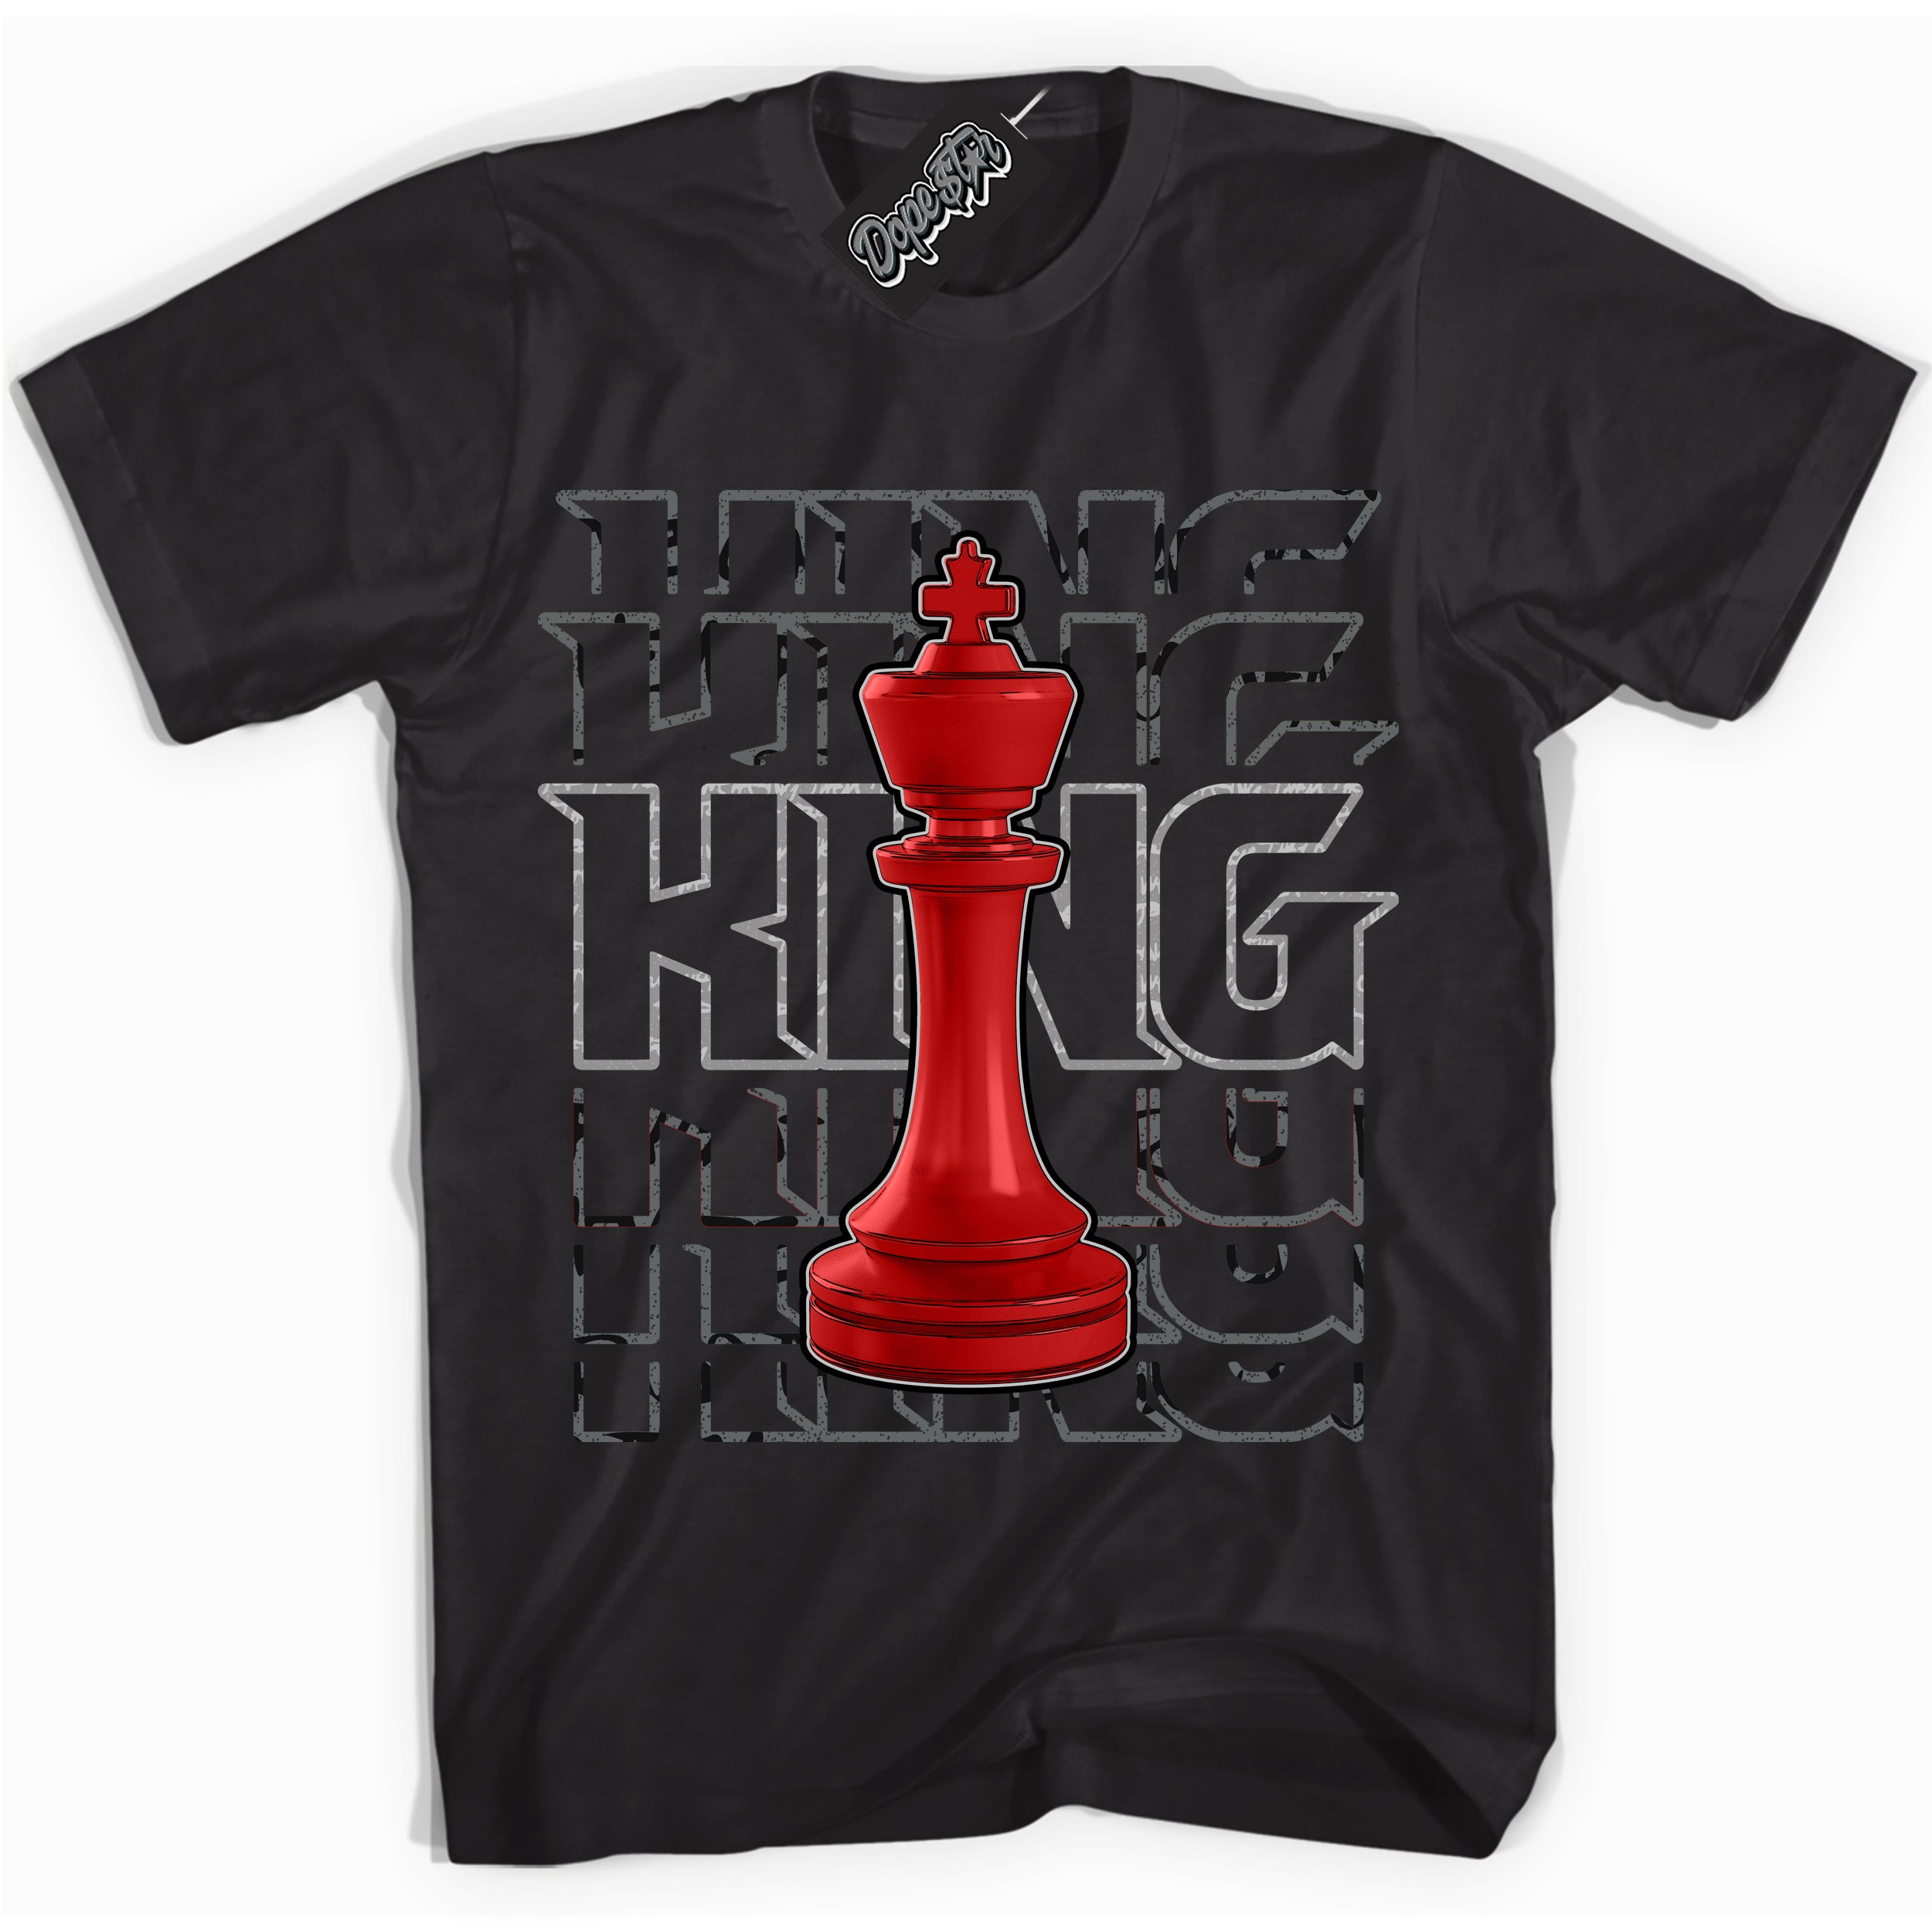 Cool Black Shirt with “ King Chess ” design that perfectly matches Rebellionaire 1s Sneakers.